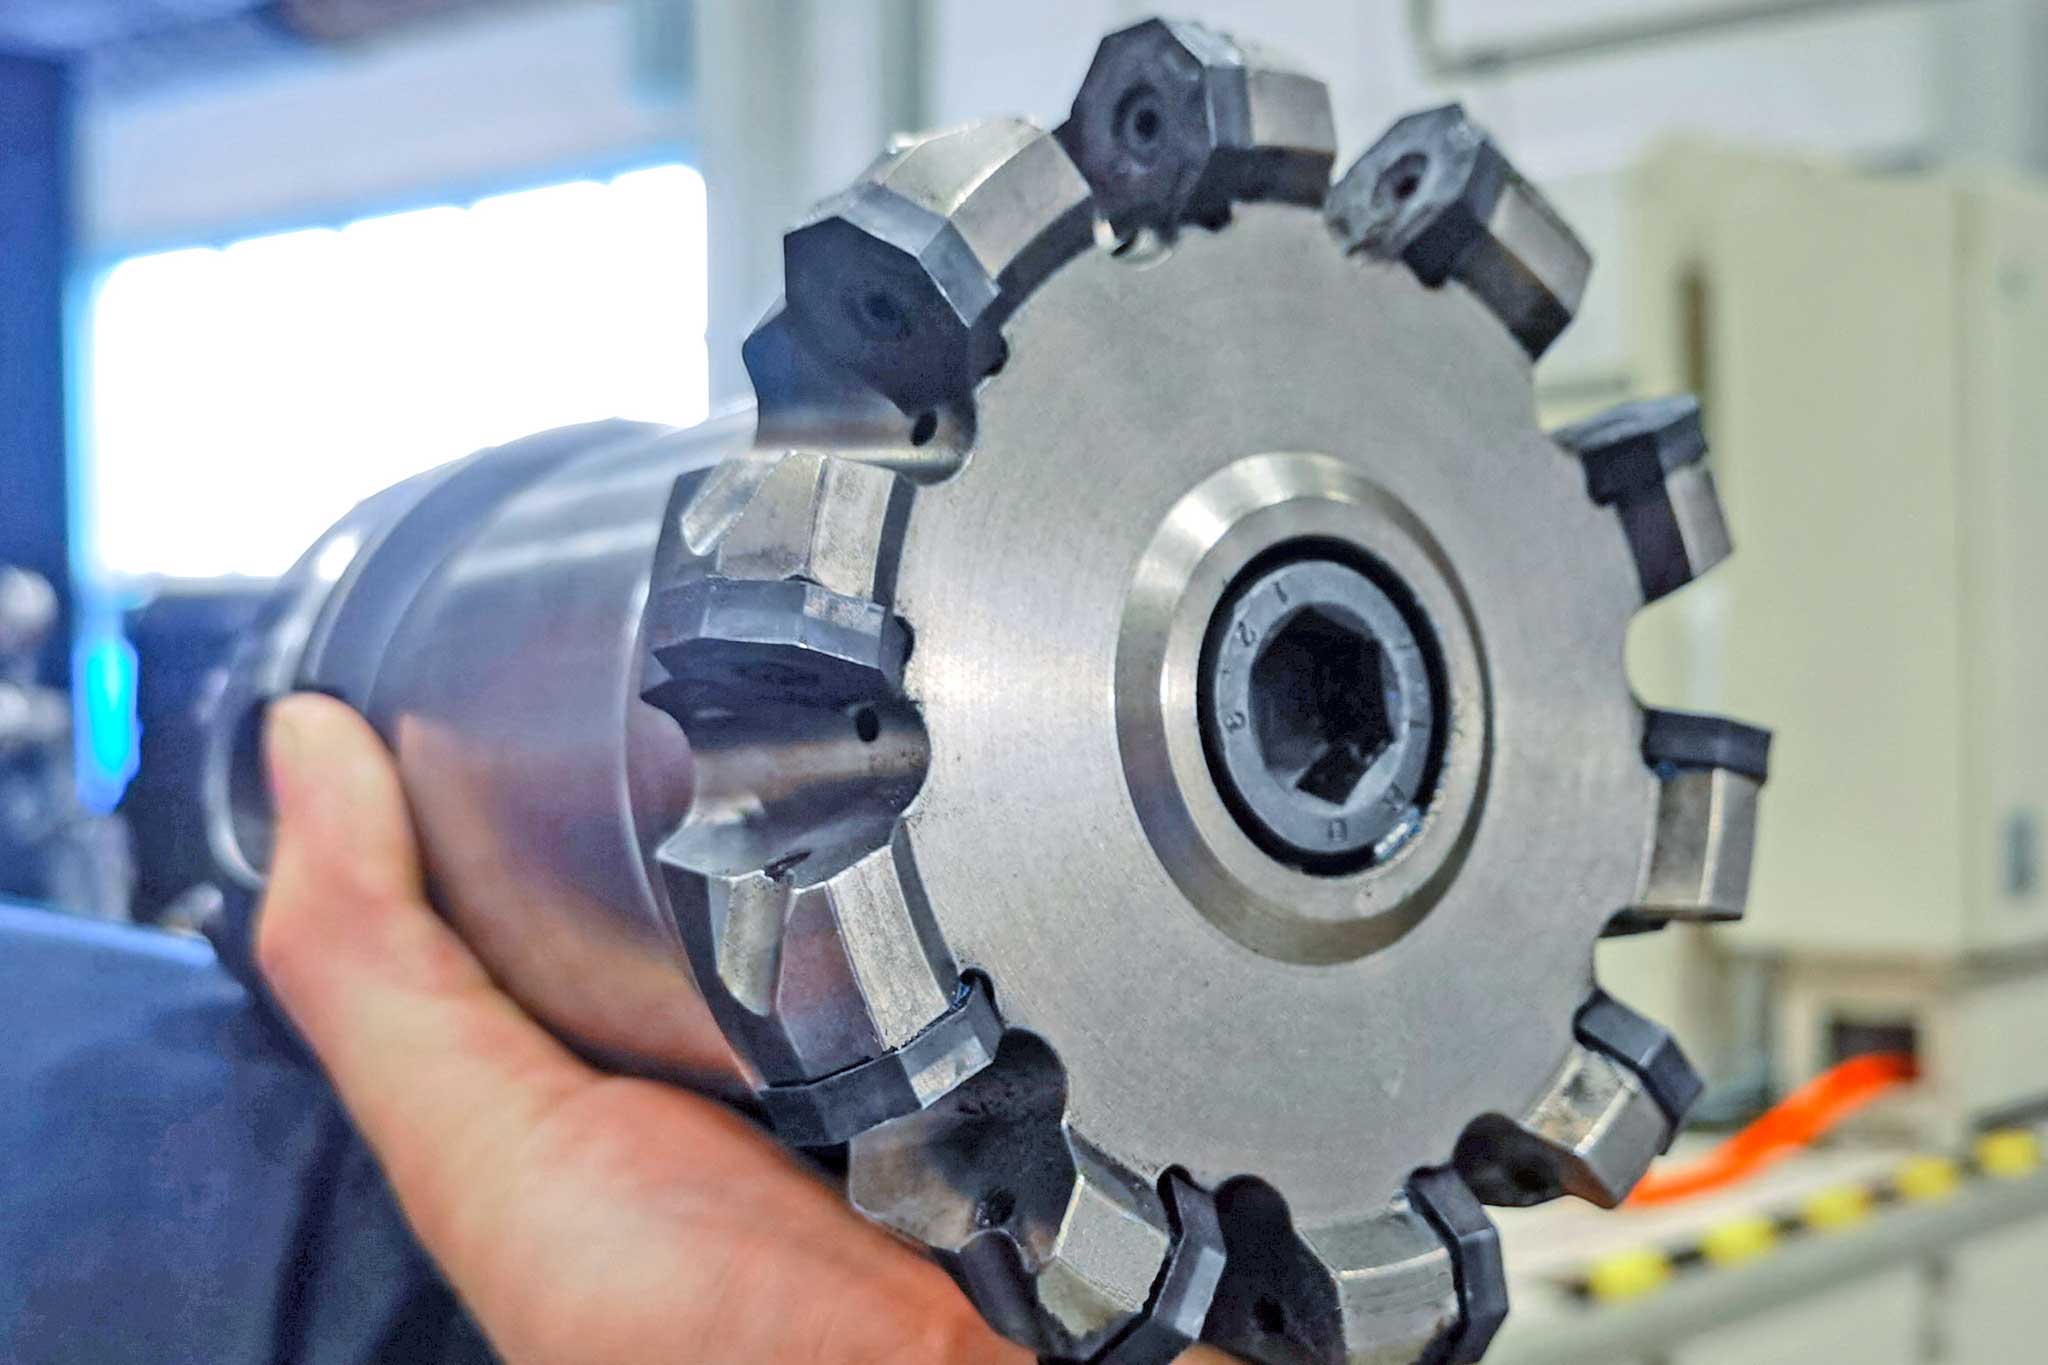 A NeoMill face milling cutter with ten OKNU indexable inserts. Every insert has 16 cutting edges.